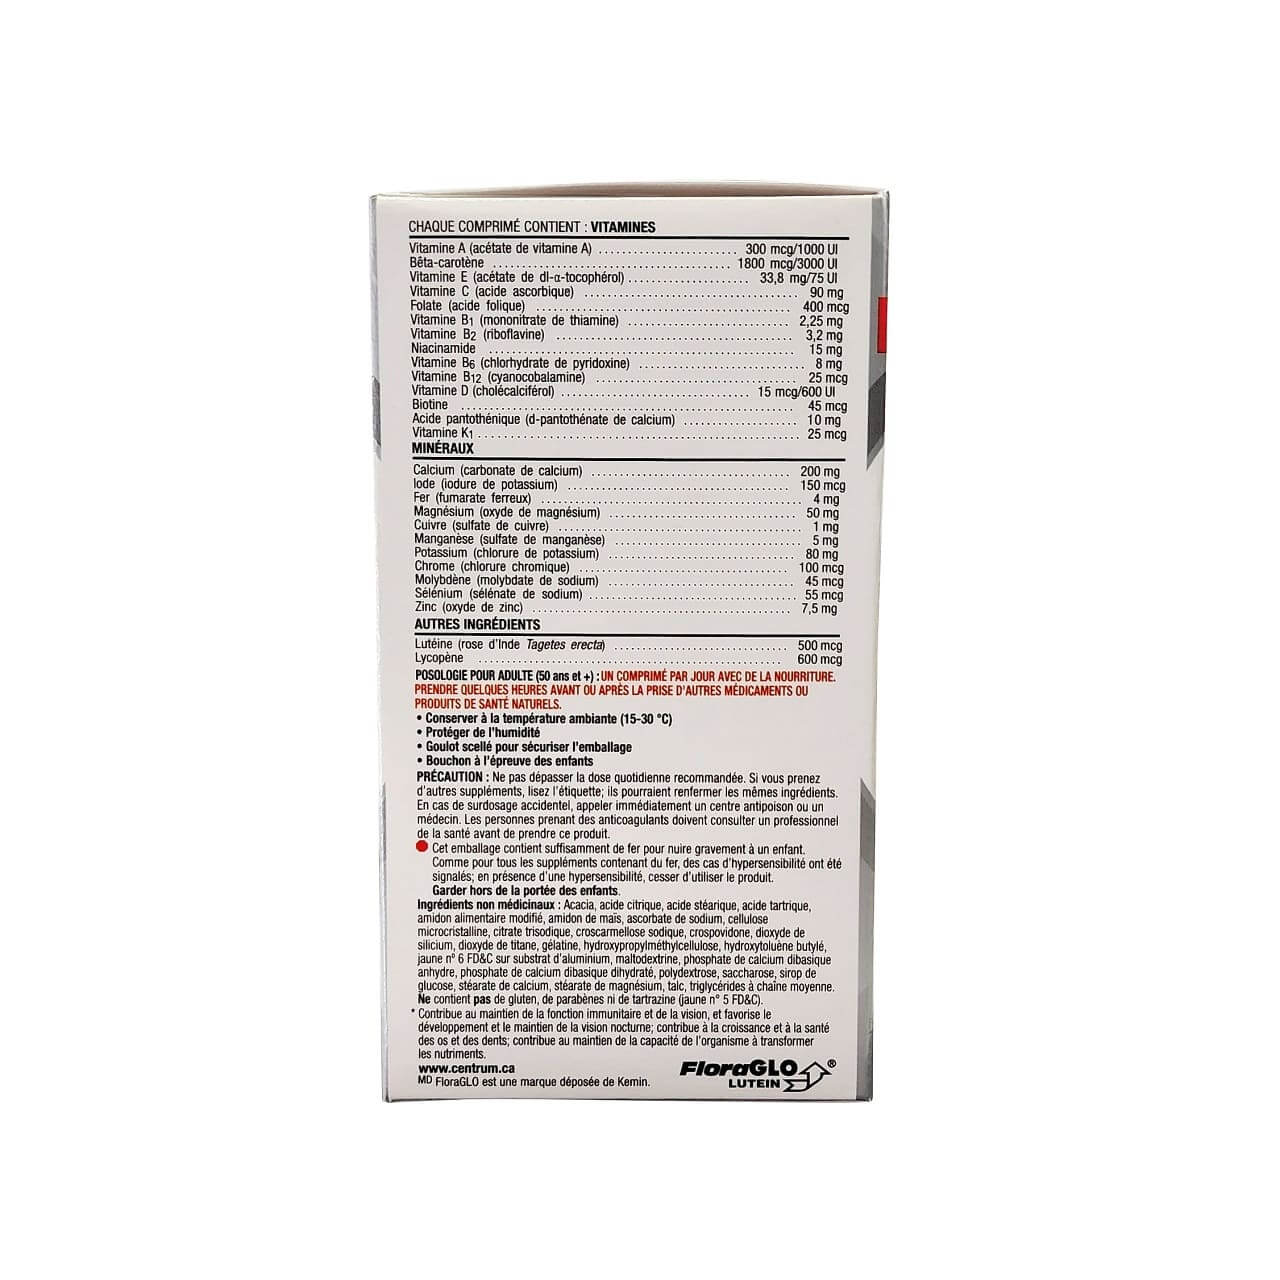 Ingredients, dose, cautions for Centrum Select Essentials for Adults 50+ (100 tablets) in French